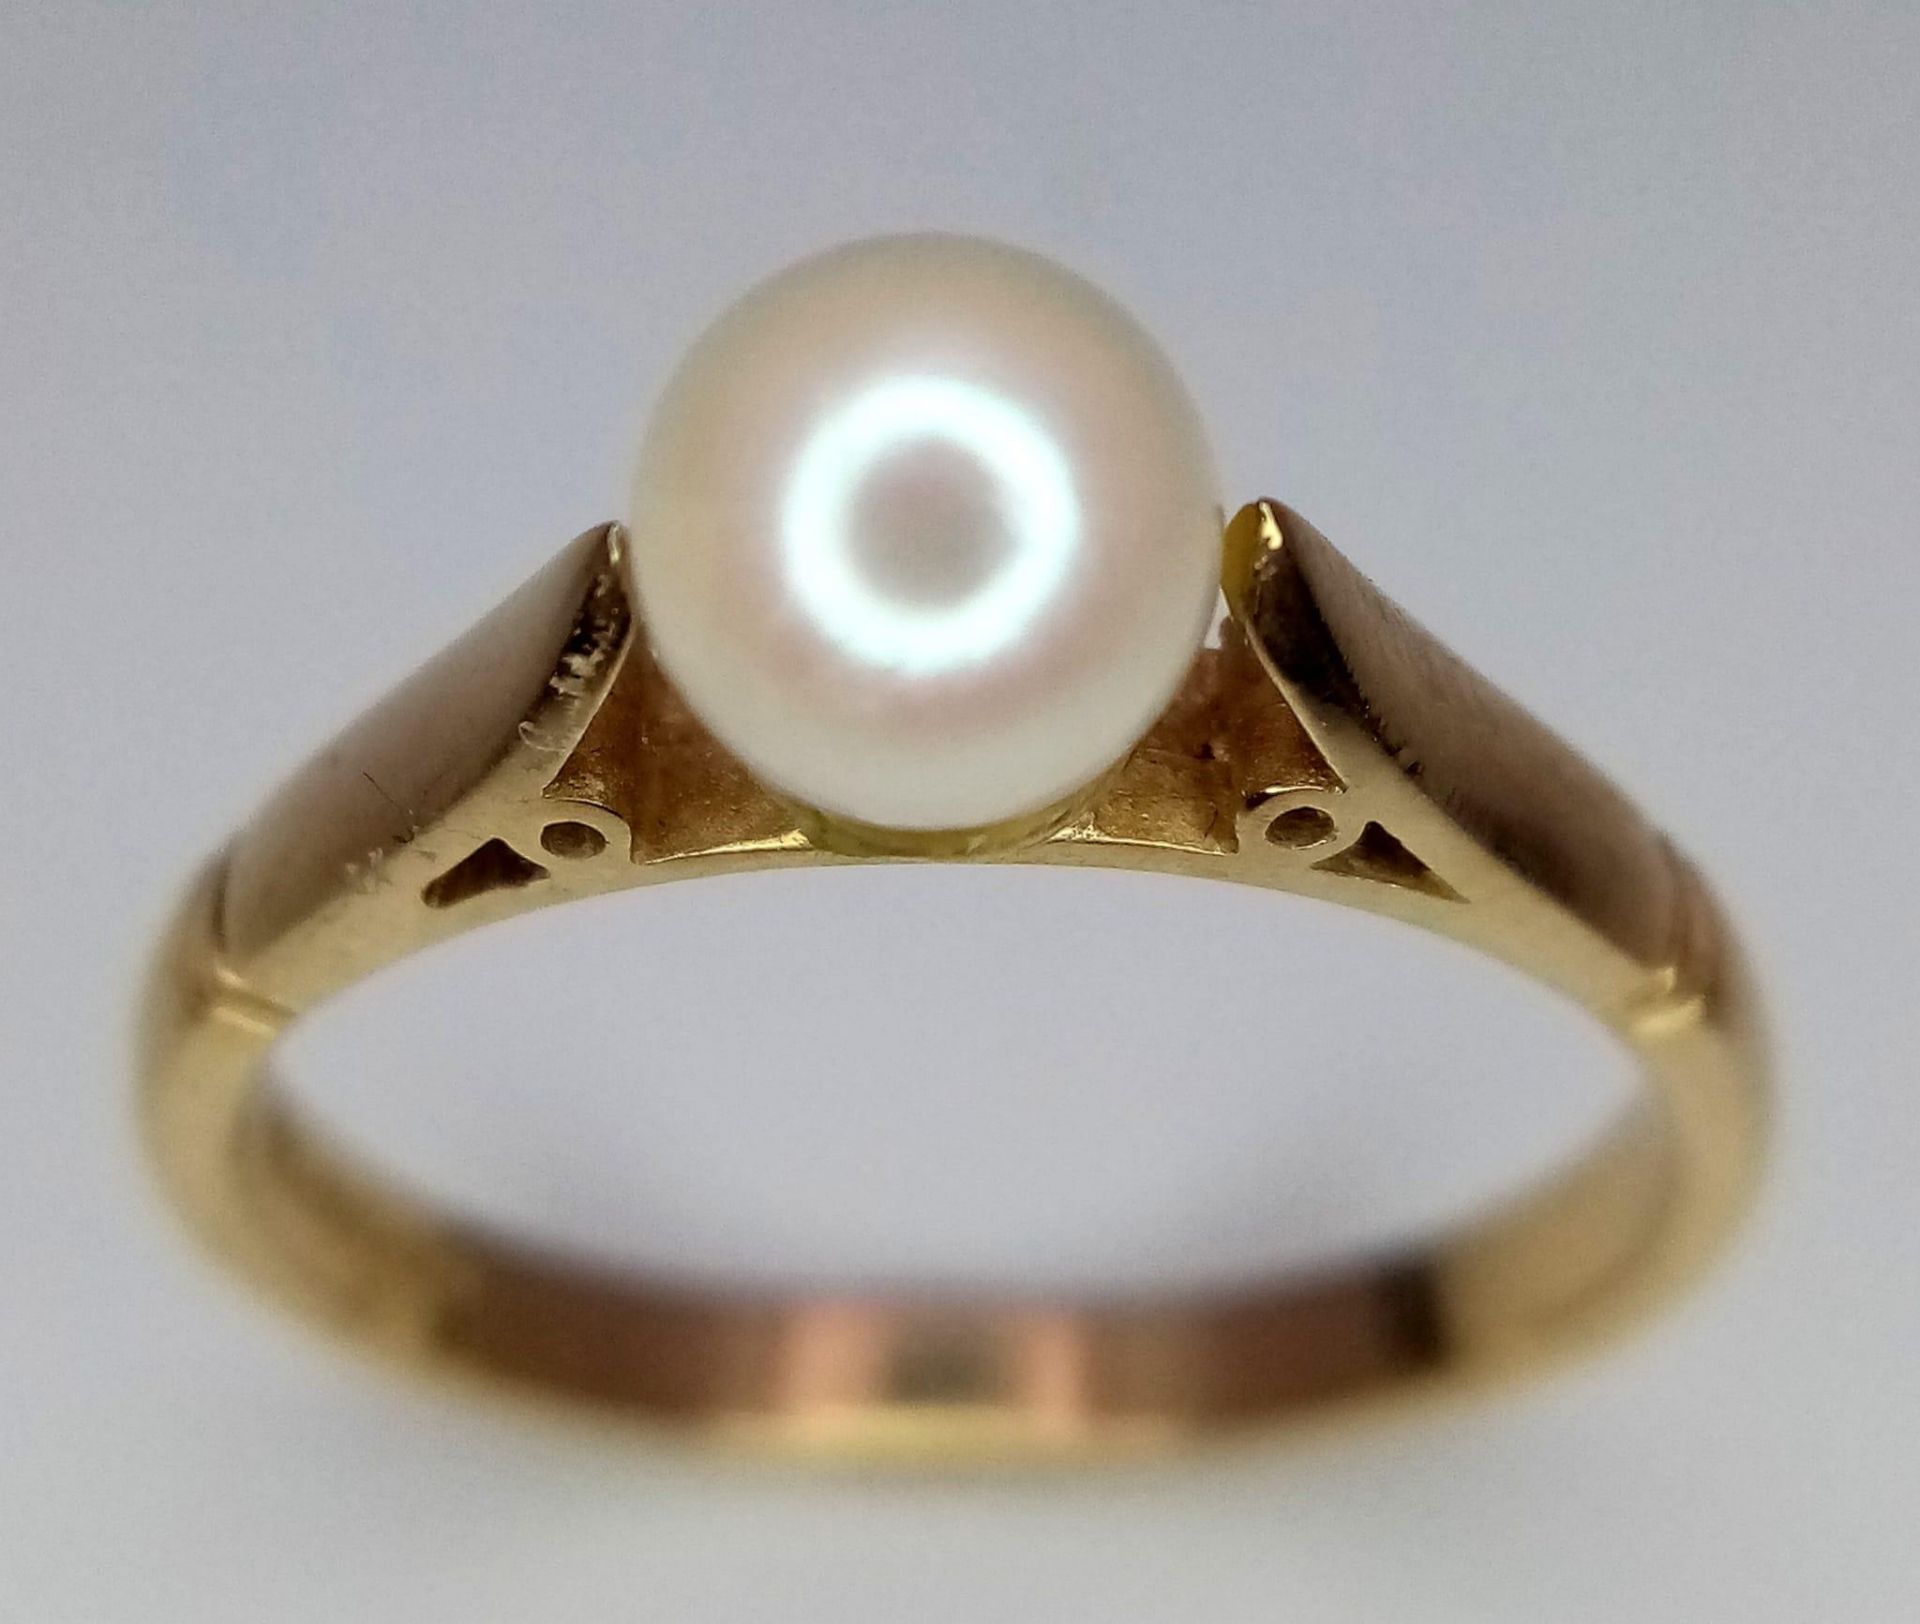 9k yellow gold ring with single cultured pearl. Weight: 2.5g Size O (pearl: 6mm)